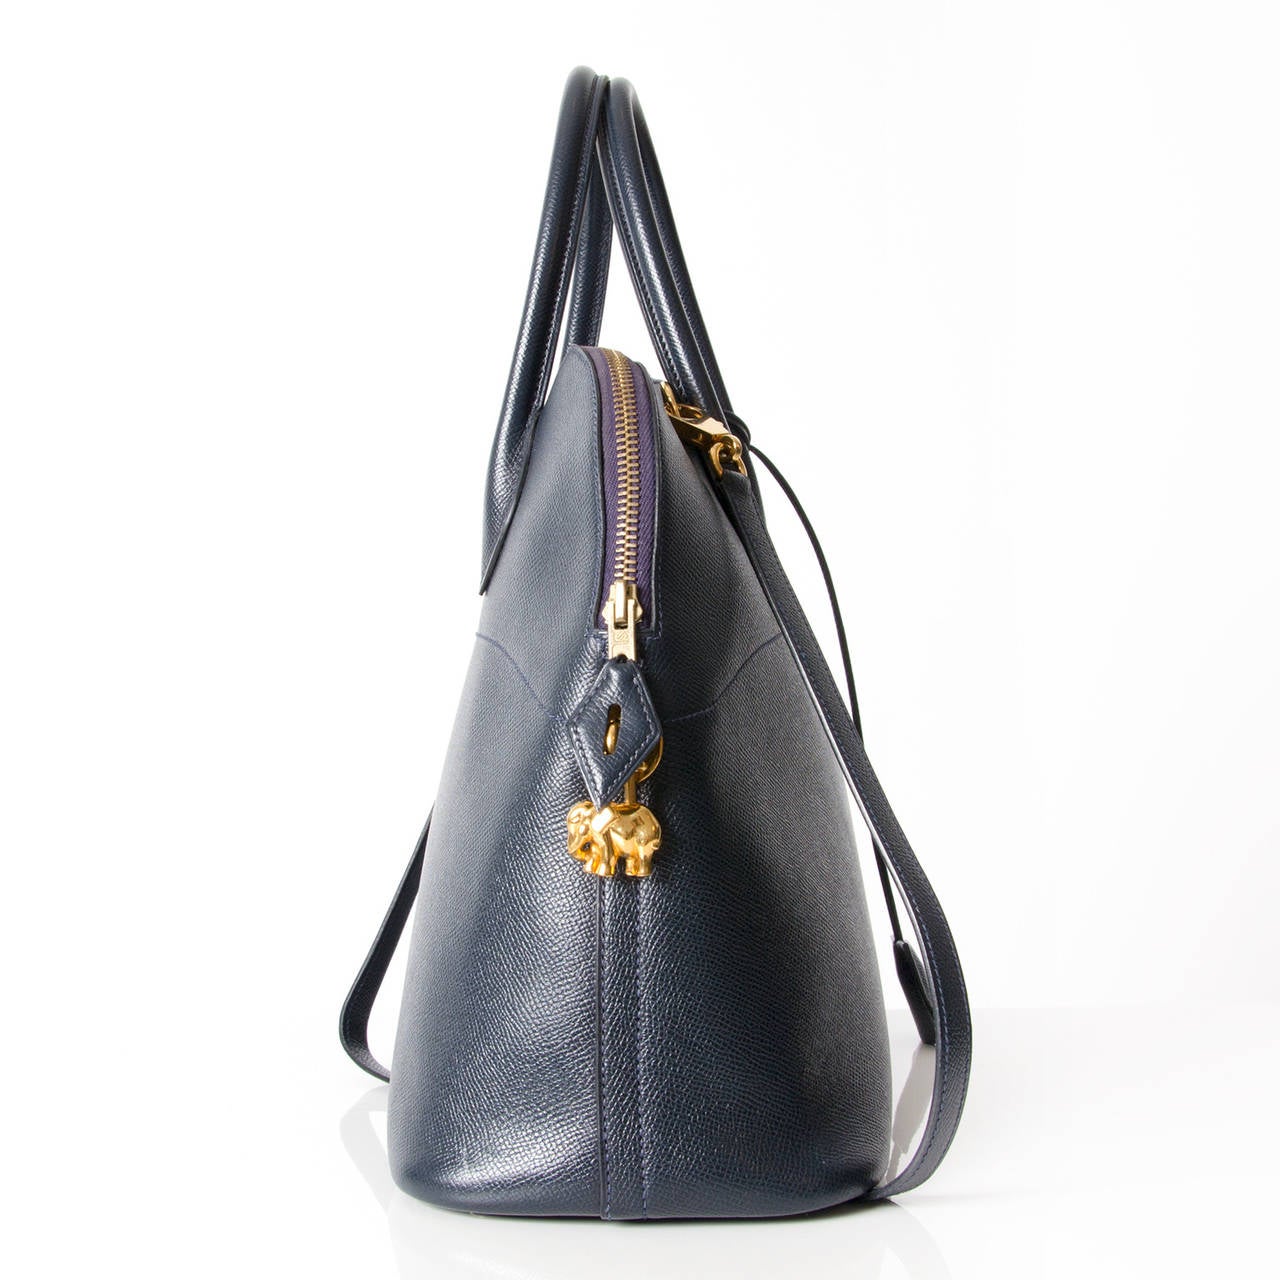 The Hermès Bolide in navy blue leather is a classic bag, which unquestionably embodies femininity and class. It is a domed top handle bag with a zip around closure. The gold hardware adds a luxurious feel to this stunning piece. The interior